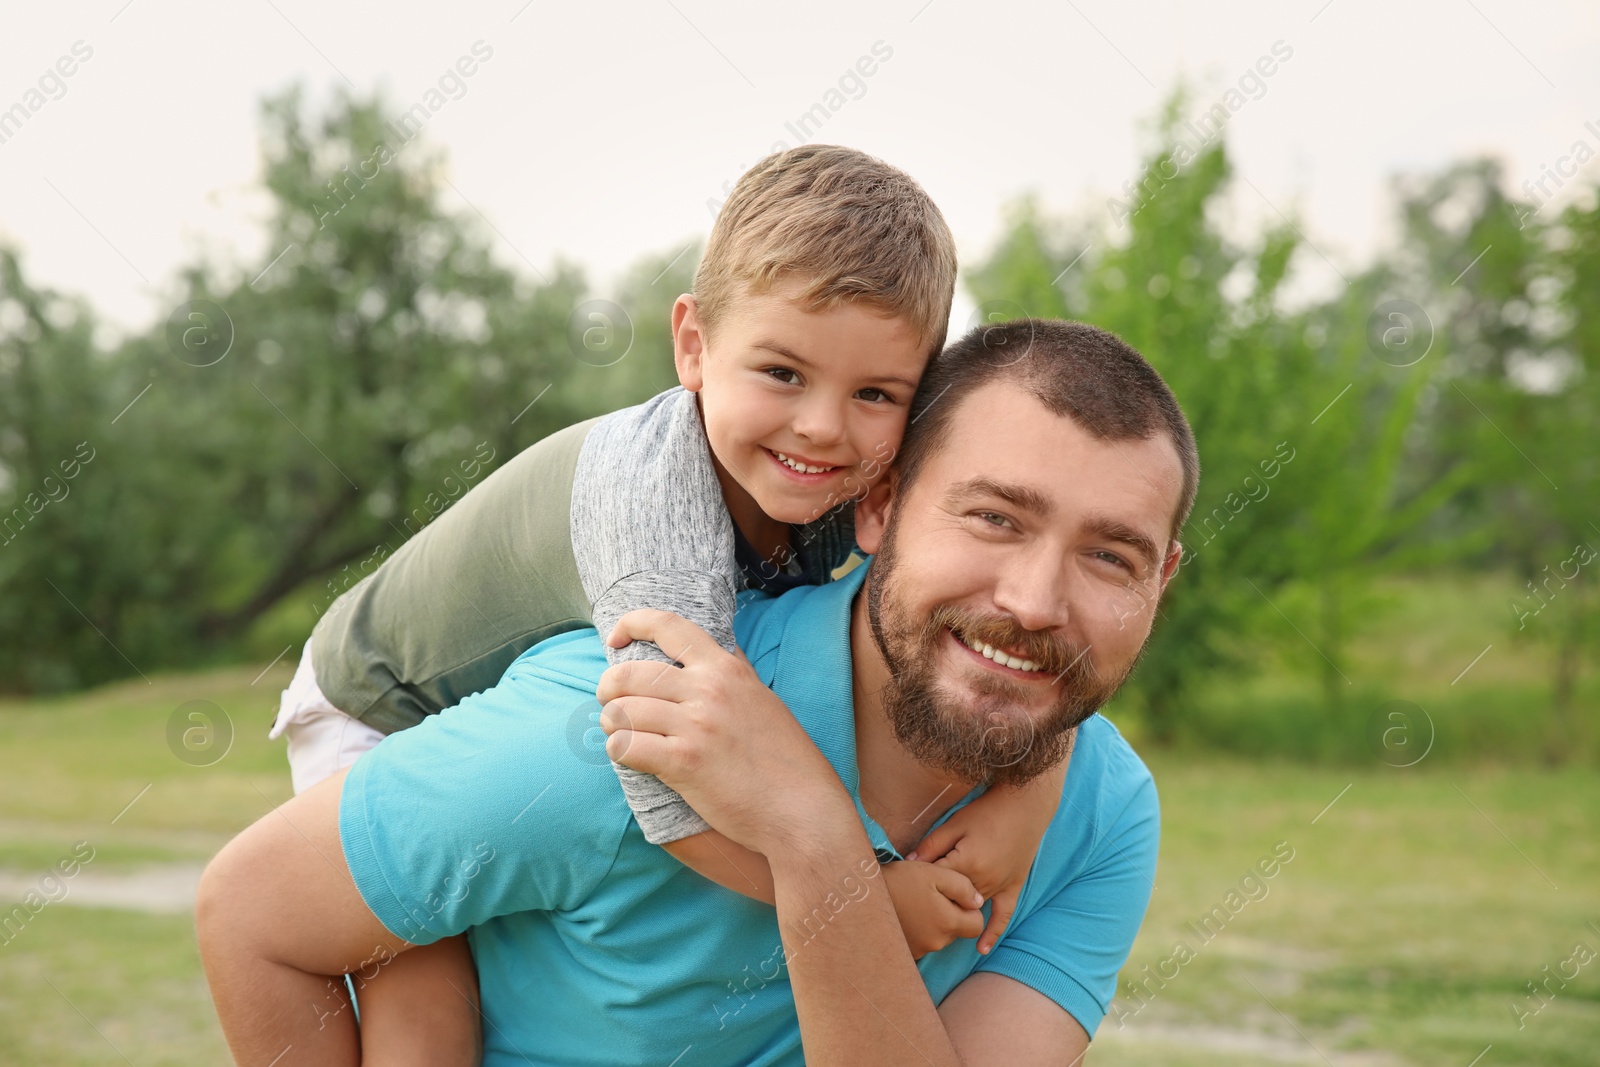 Photo of Man with his child outdoors. Happy family